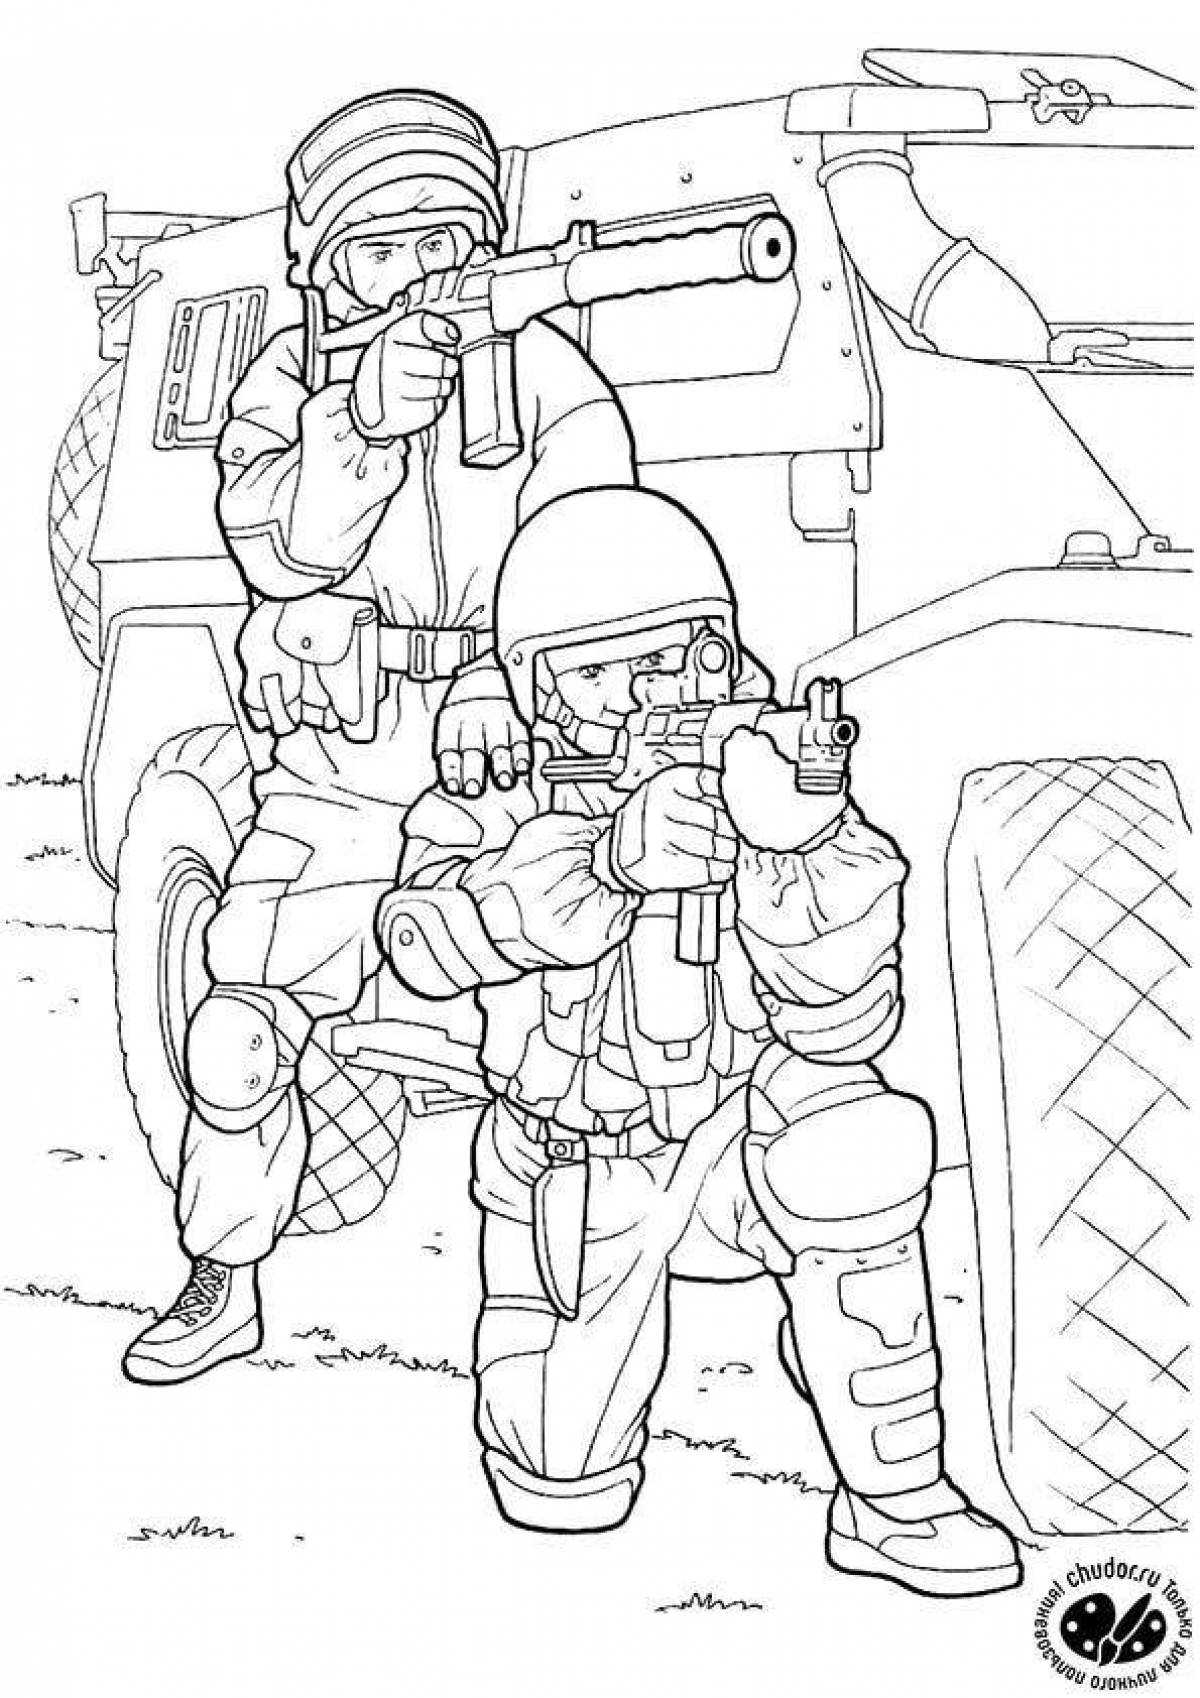 Glamorous Special Forces Coloring Page for Kids